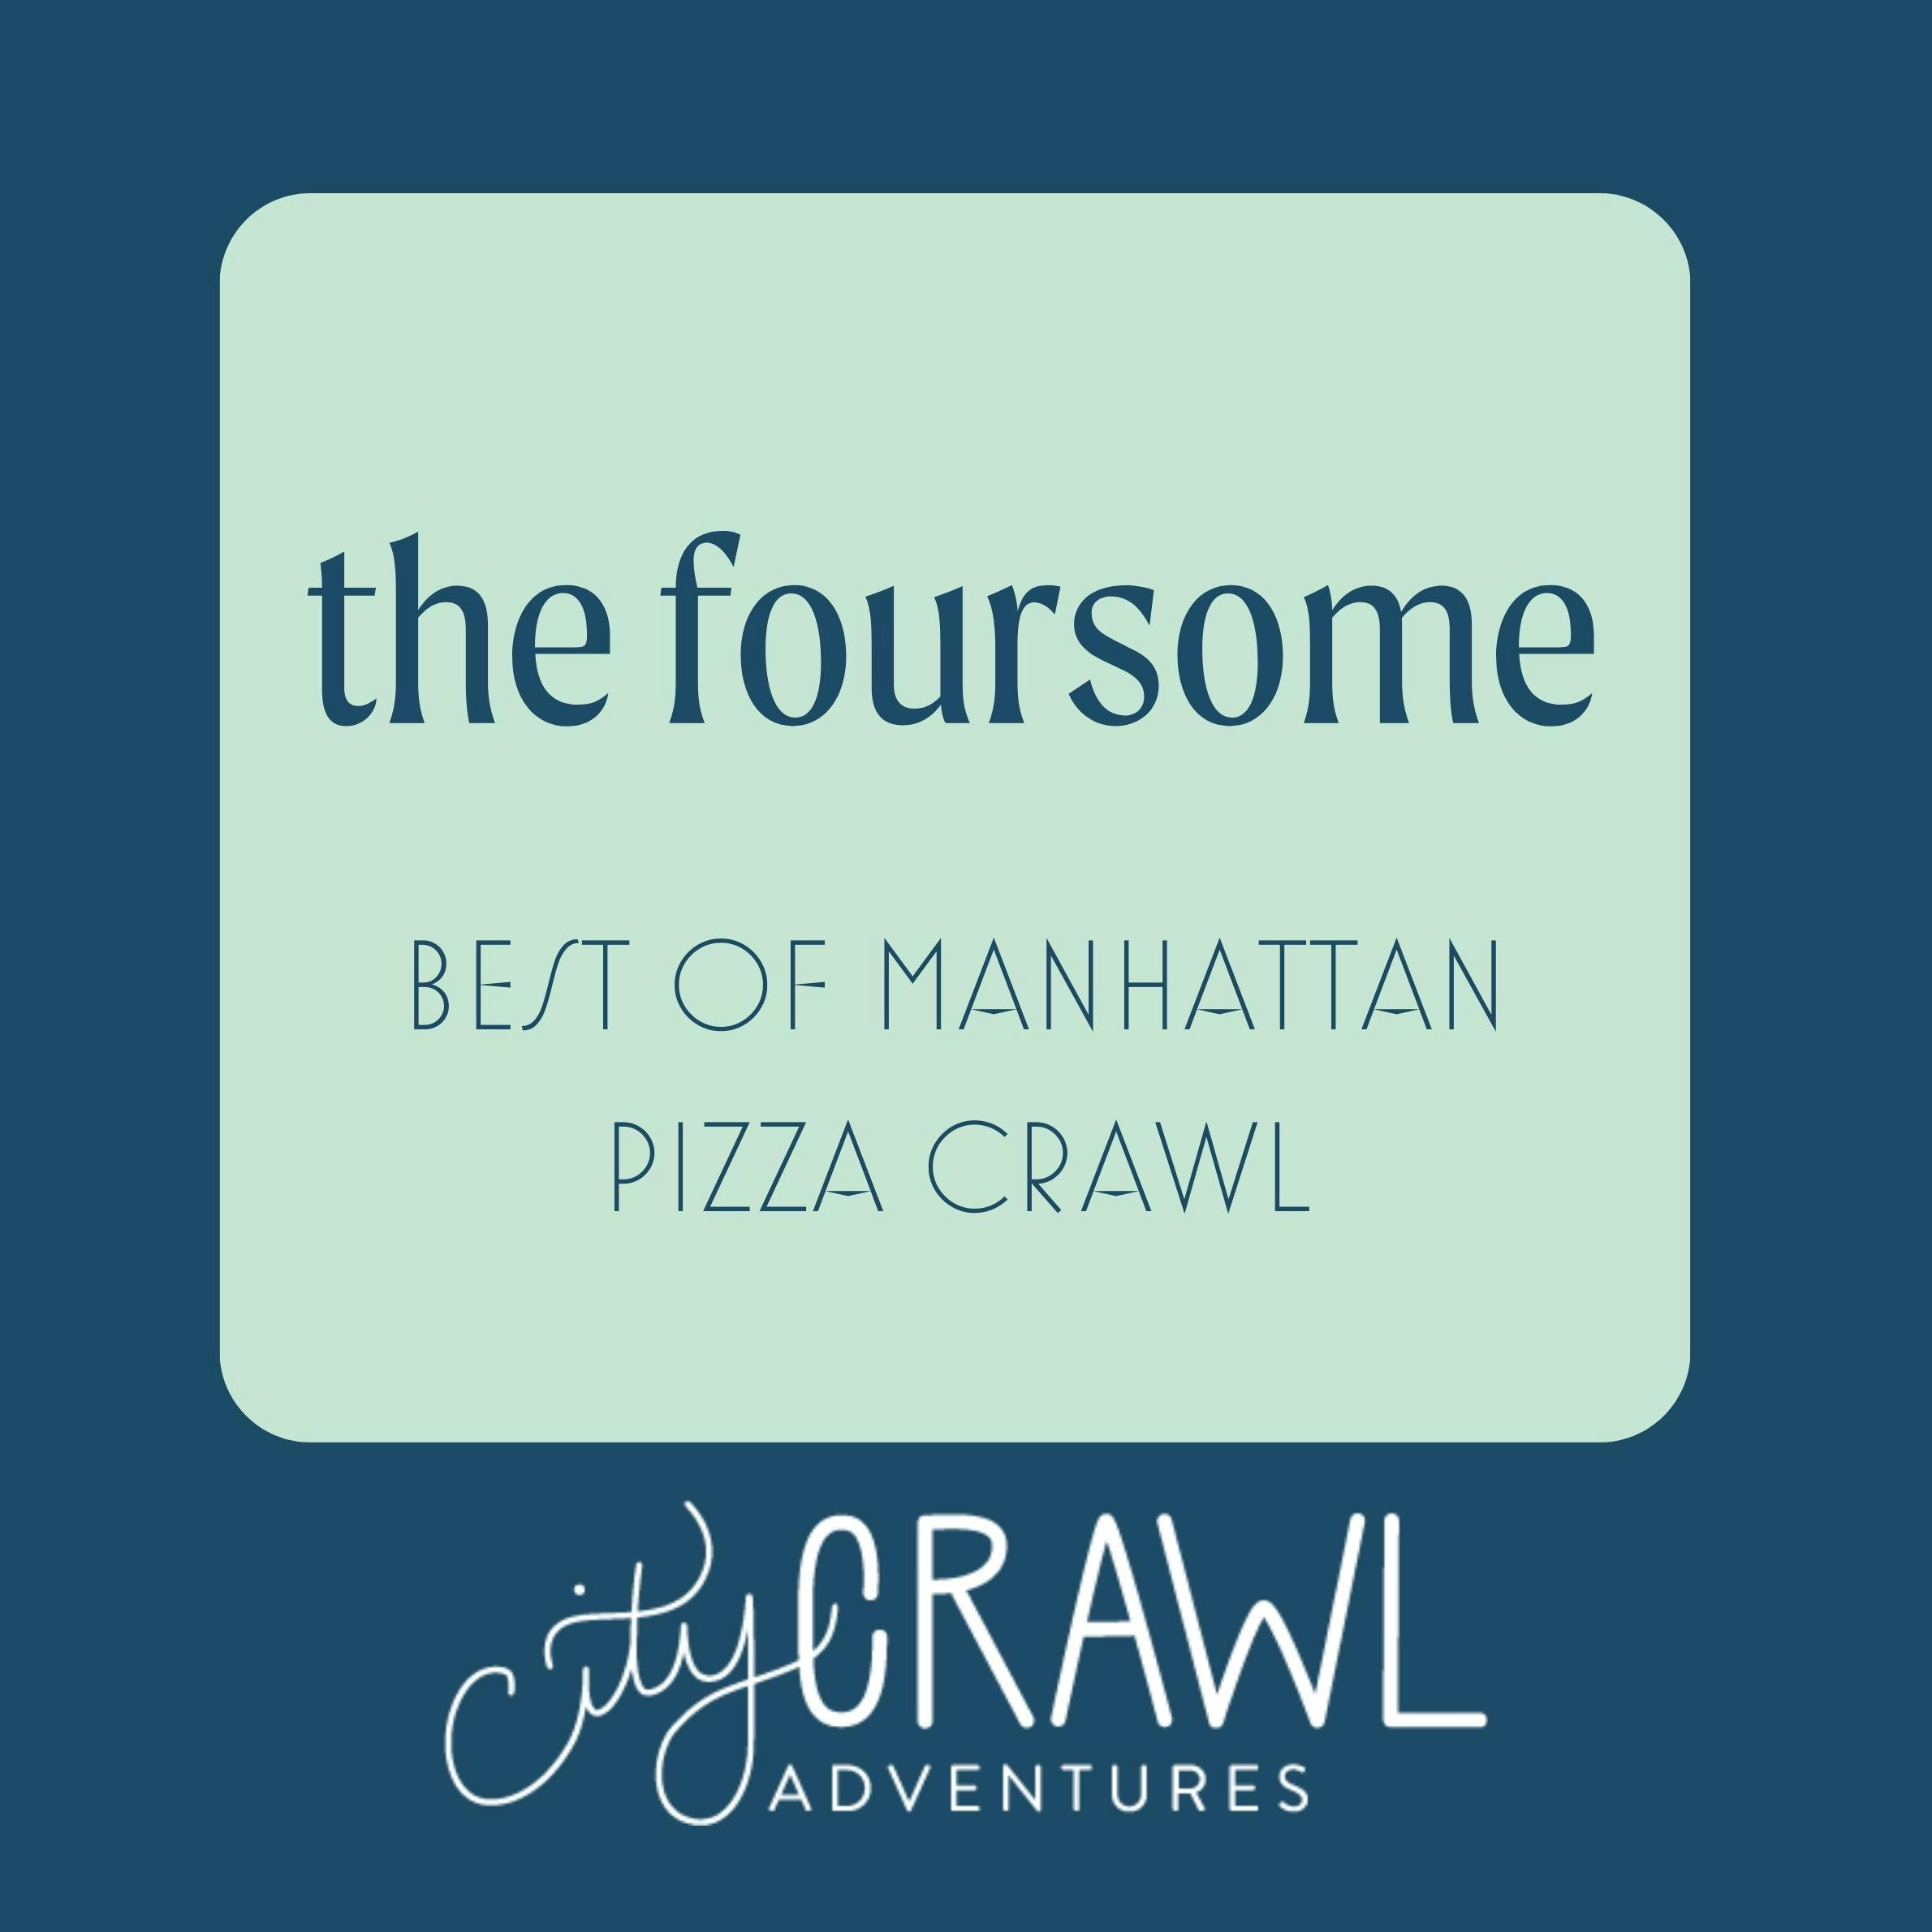 The Foursome: Best of Manhattan pizza crawl